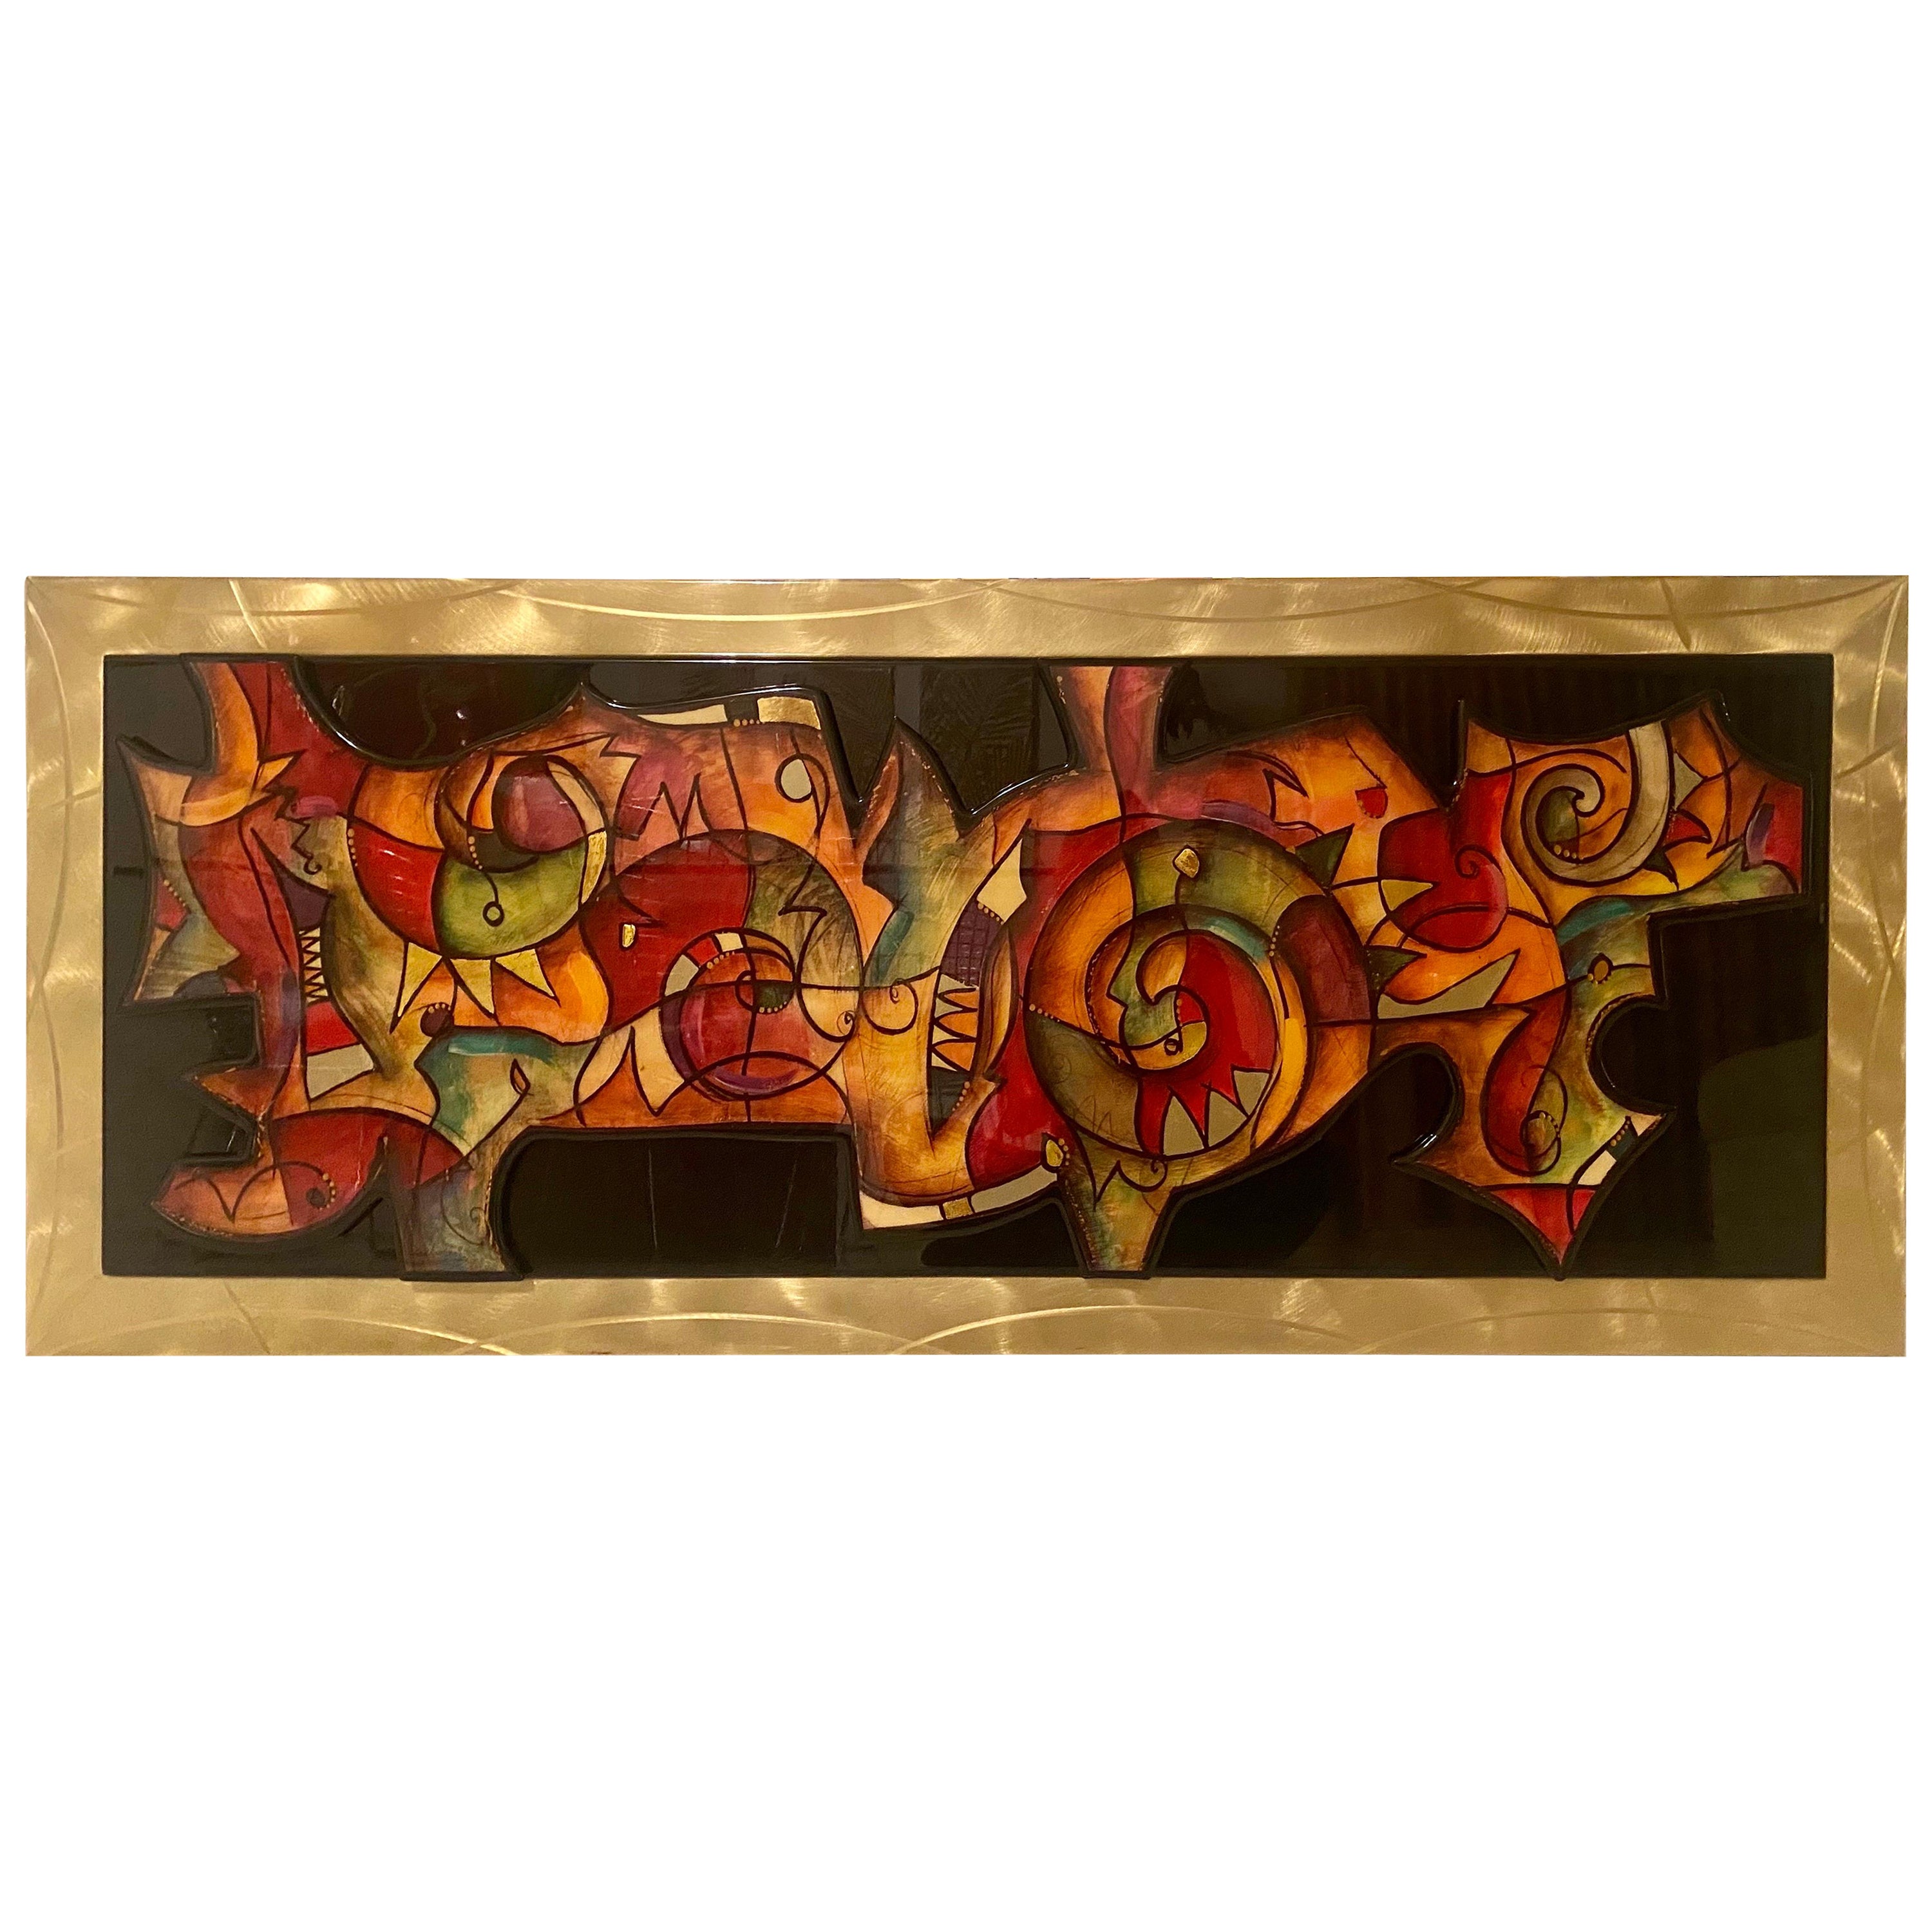 Modern Graffiti Geometric Swirls of Color on Acrylic 3D Mounted Wall Decoration For Sale